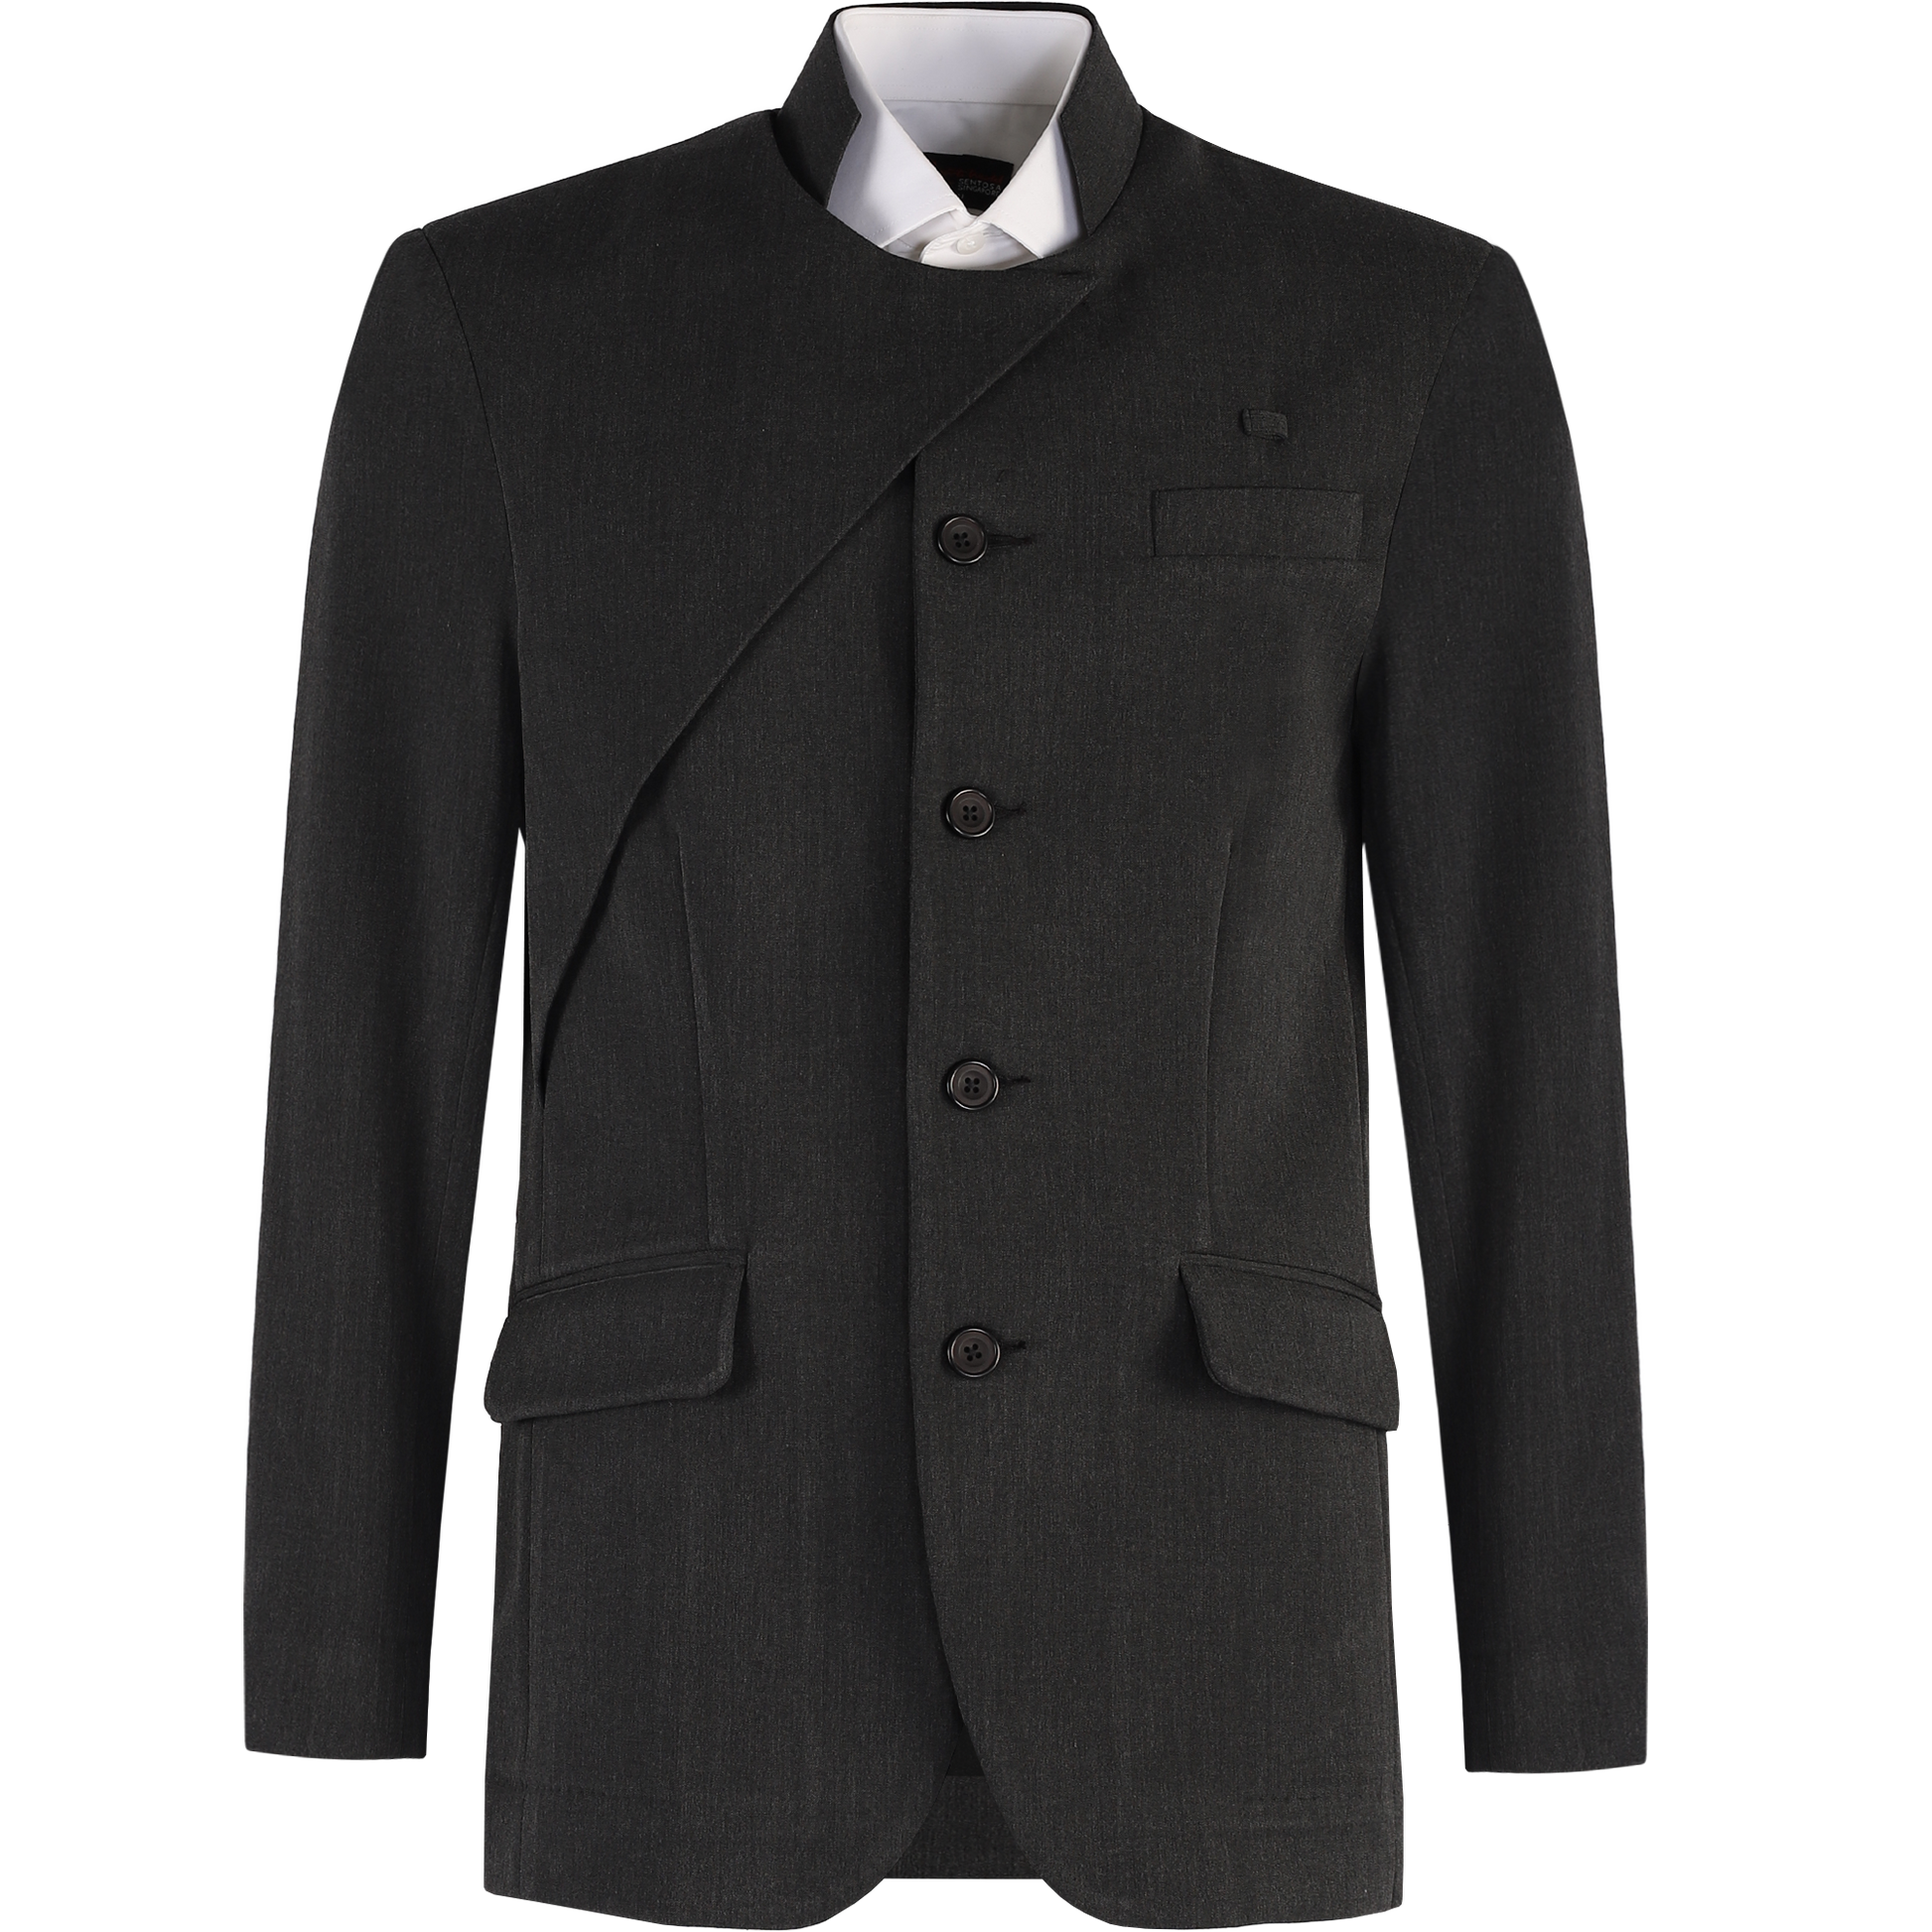 Charcoal Men's Jacket for Frontline Associates — Uniforms by CYC Corporate Label